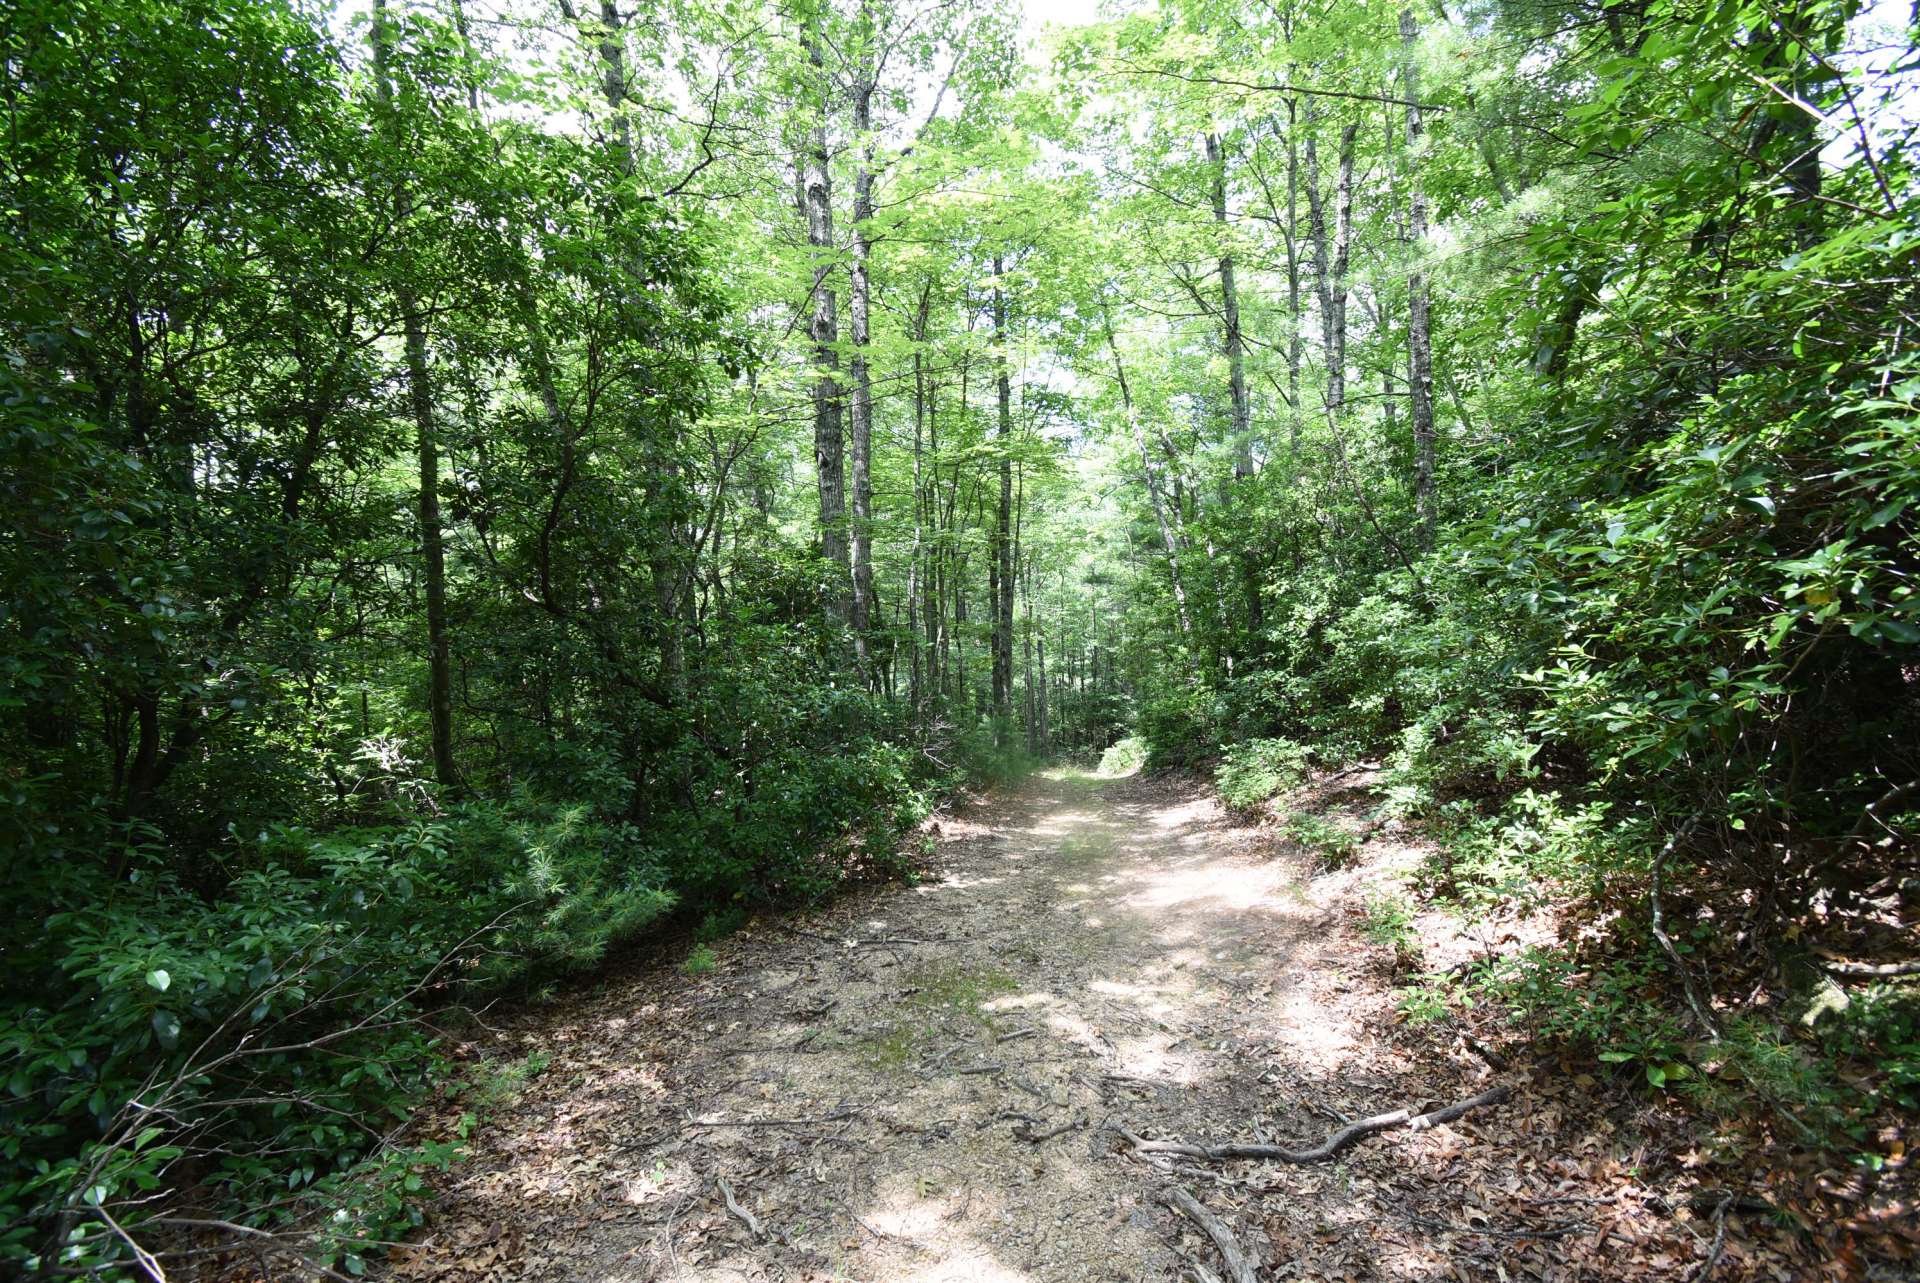 This 41.22 acre tract located in the Southeastern section of Ashe County in the NC High Country is perfect for your private mountain estate, recreational mountain retreat, or investment property. This property is offered at $258,000. S270